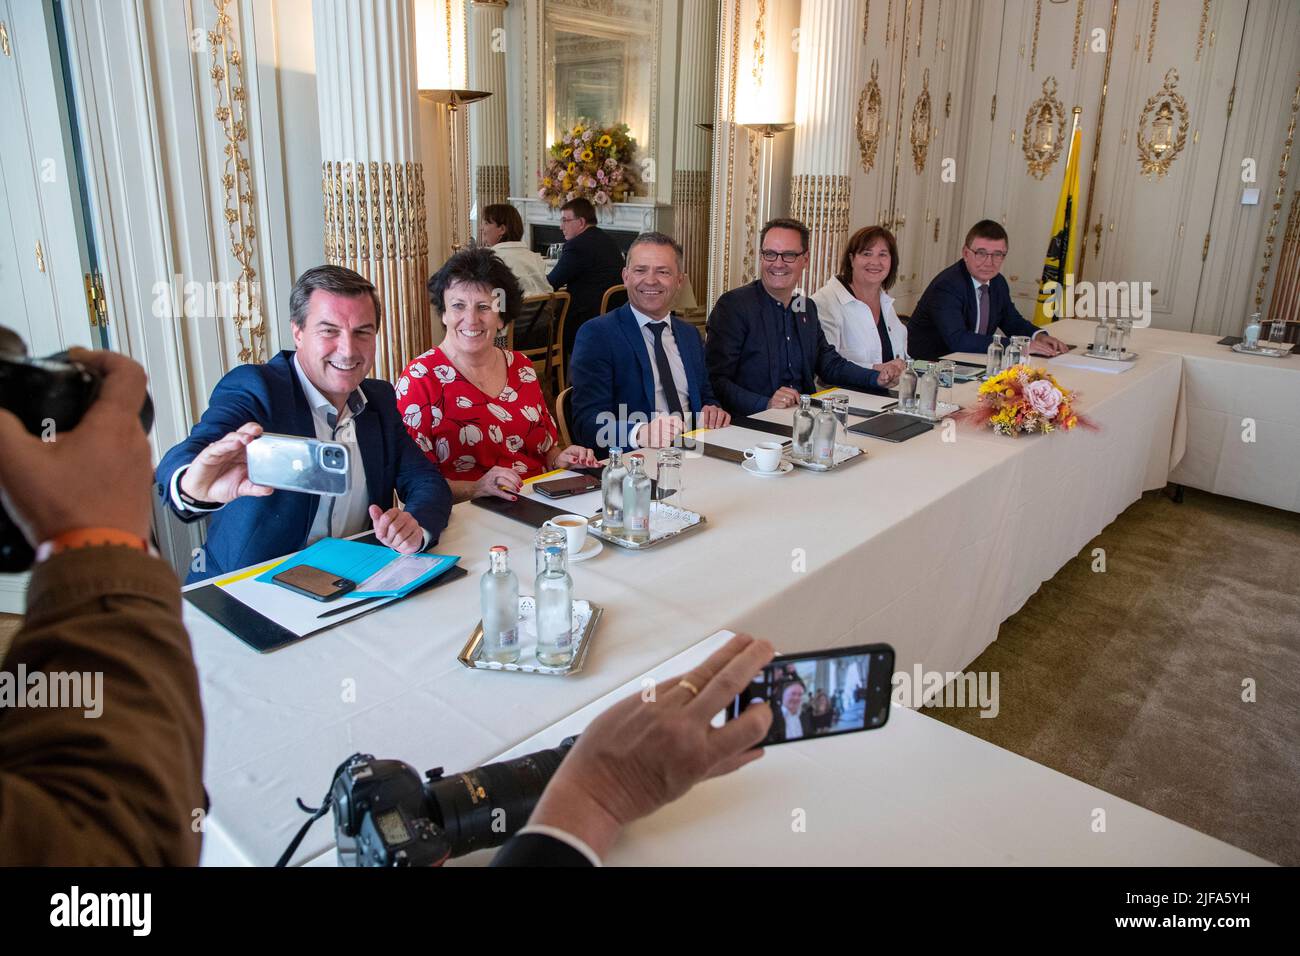 Brussels, Belgium. 01st July, 2022. Gert Truyens (L), Danny Van Assche (3R), Ann Vermorgen and Hans Maertens pictured during a press conference of the Flemish Government, together with the representatives of the 'SERV', about the newly reached new employment agreement, Friday 01 July 2022, in Brussels. This agreement is a new important step in the ambition to bring the employment rate in Flanders towards 80 percent. BELGA PHOTO NICOLAS MAETERLINCK Credit: Belga News Agency/Alamy Live News Stock Photo